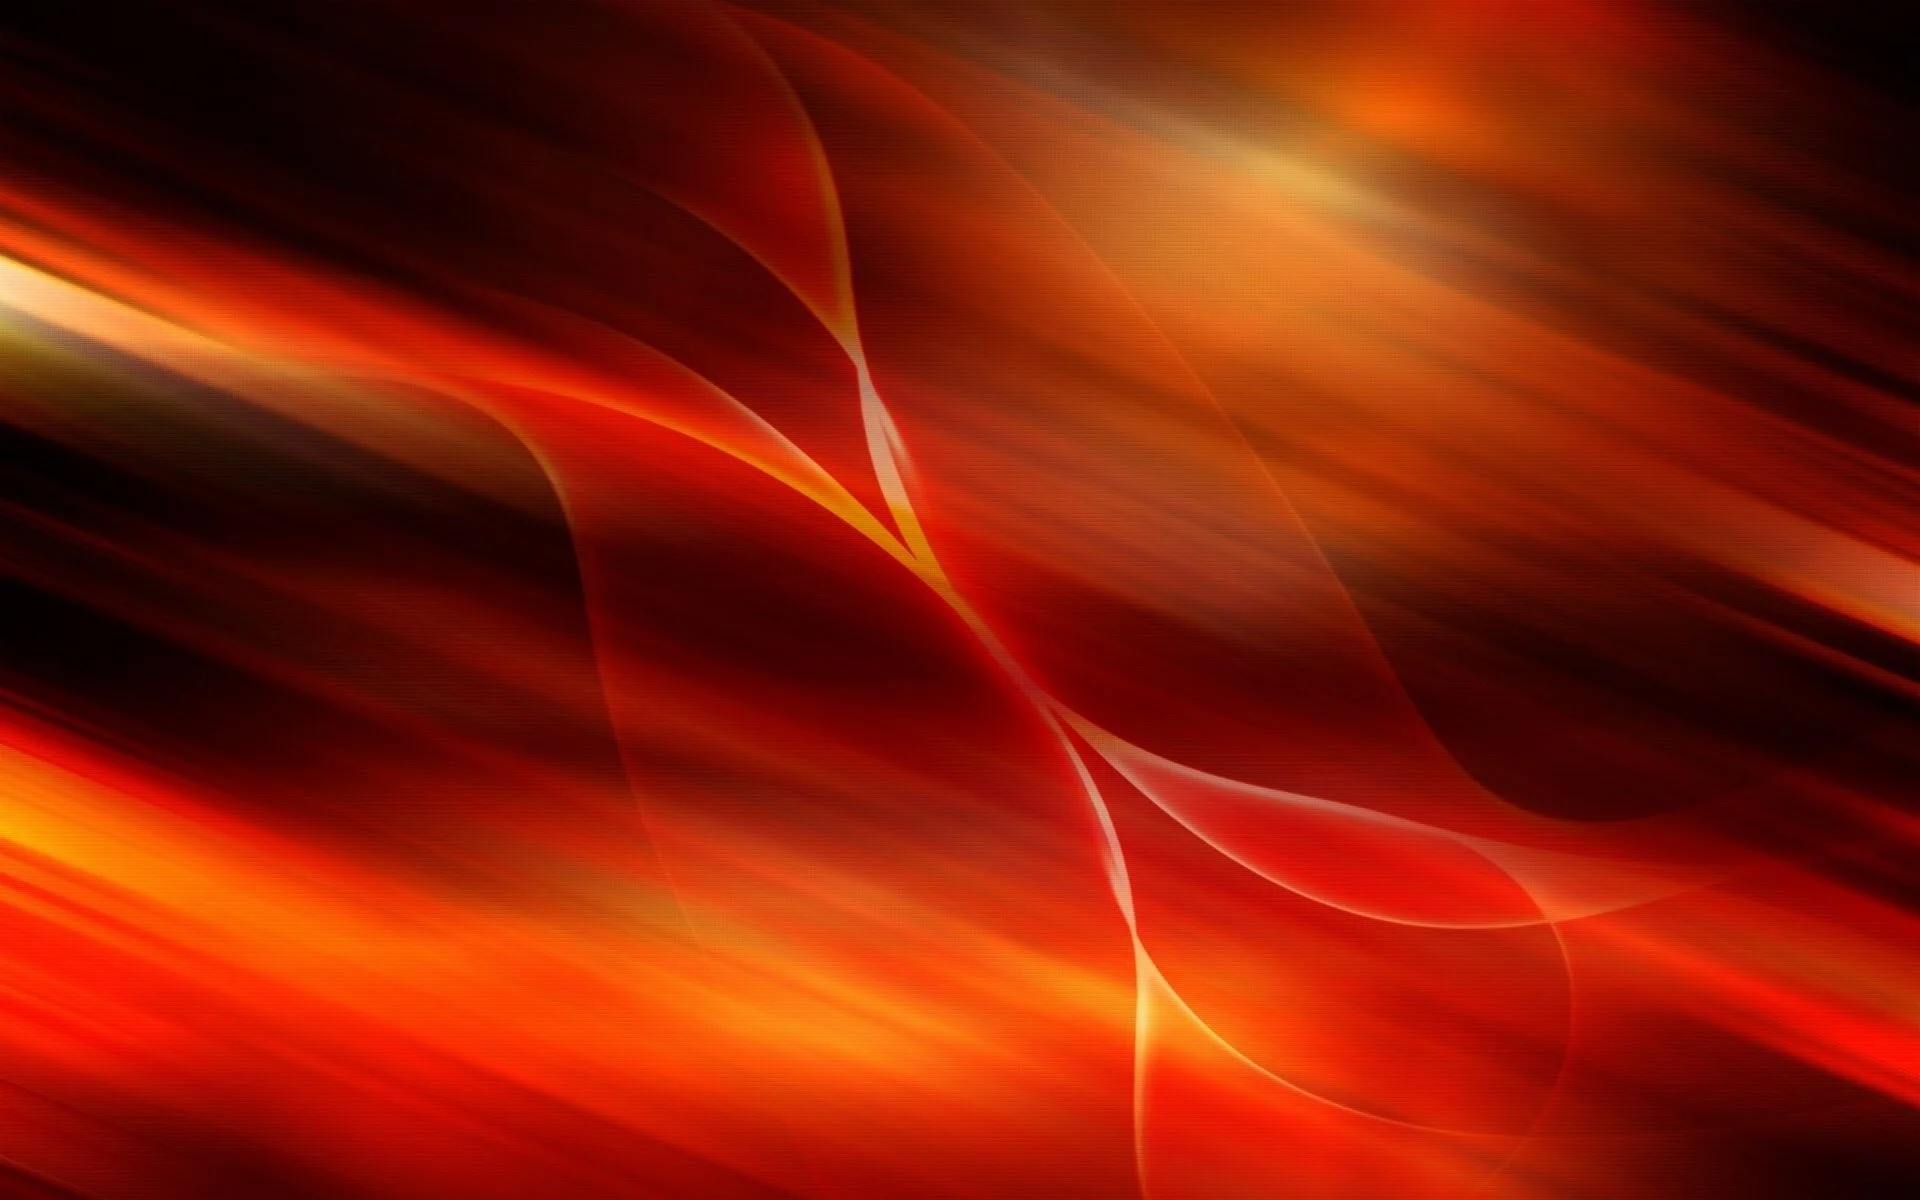 HD Wallpaper Background ID320543. Abstract Orange